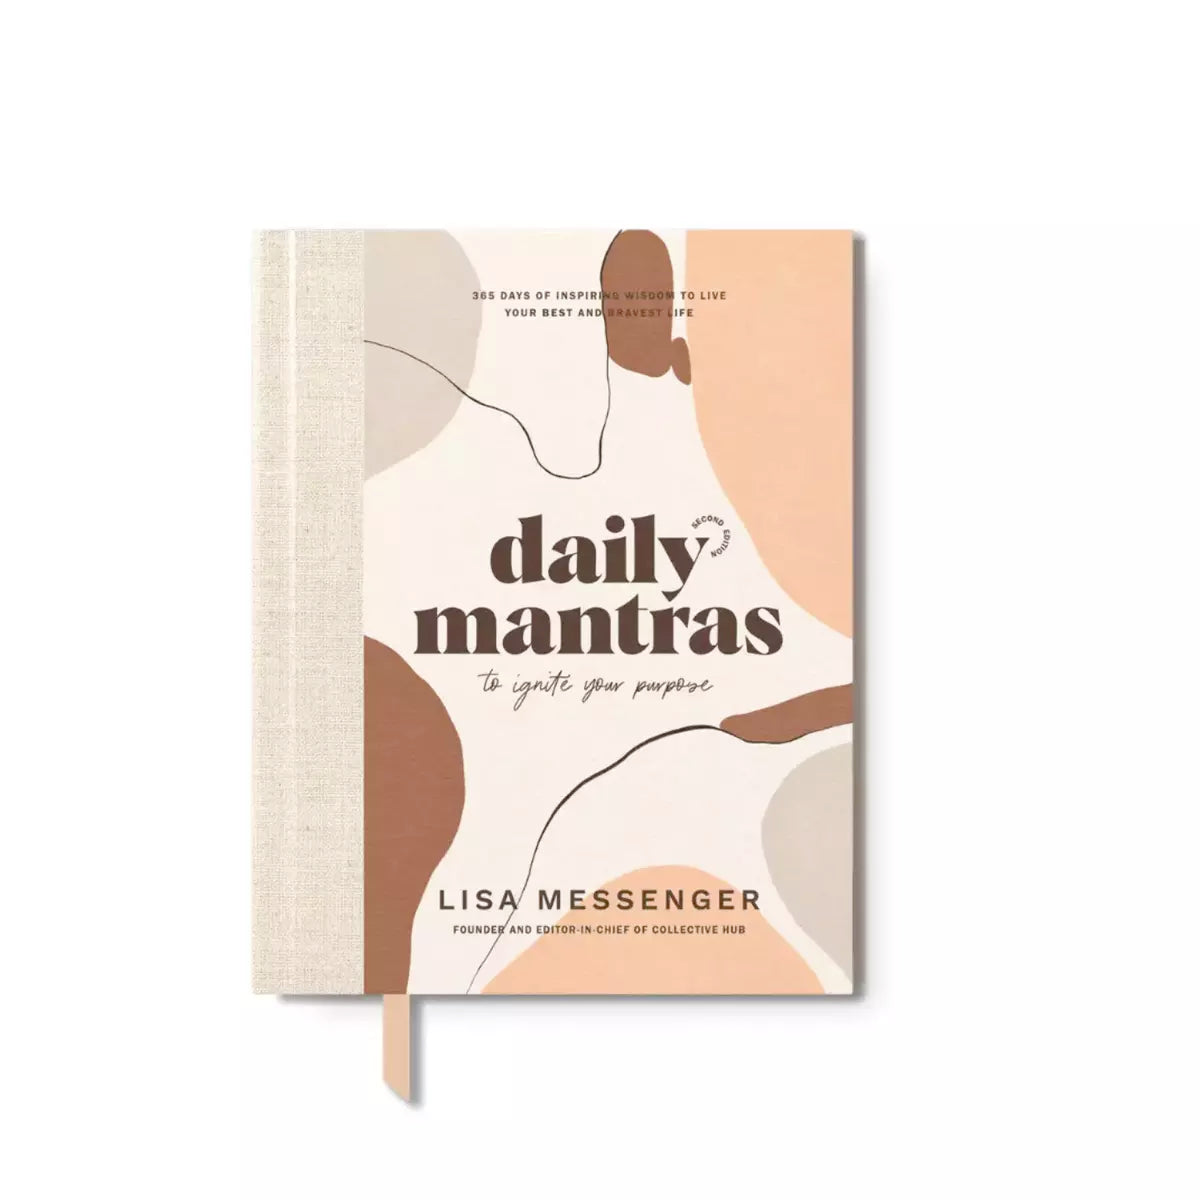 Lisa Messenger's Daily Mantras to Ignite Your Purpose Second Edition, an inspirational collection of best-selling quotes by Collective Hub.